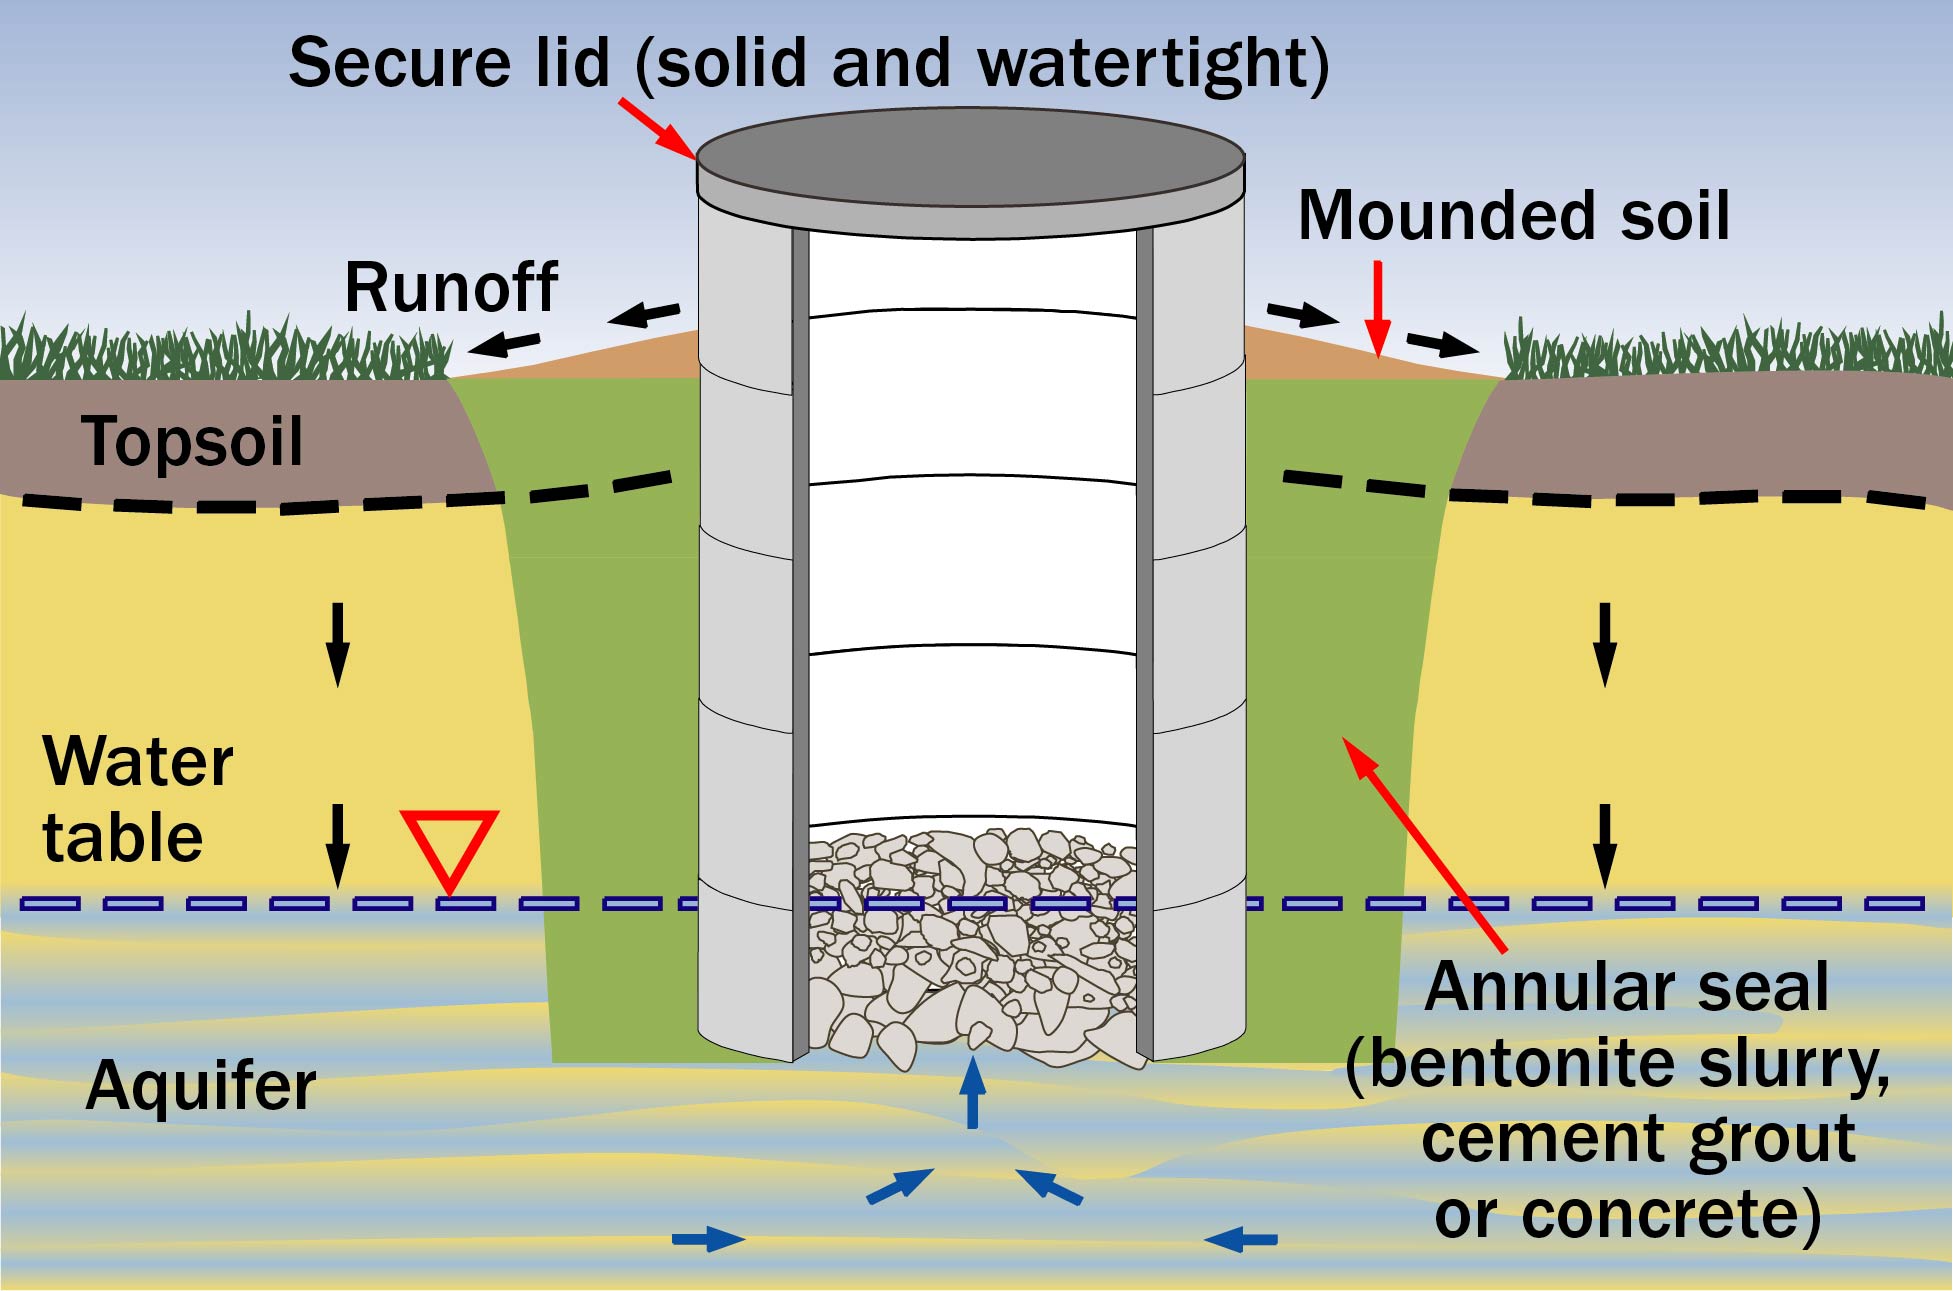 Figure 1. Diagram showing soil mounded up around wellhead, diverting water flow away from sides of the well and filtering through topsoil and subsoil and then being drawn up into the well.